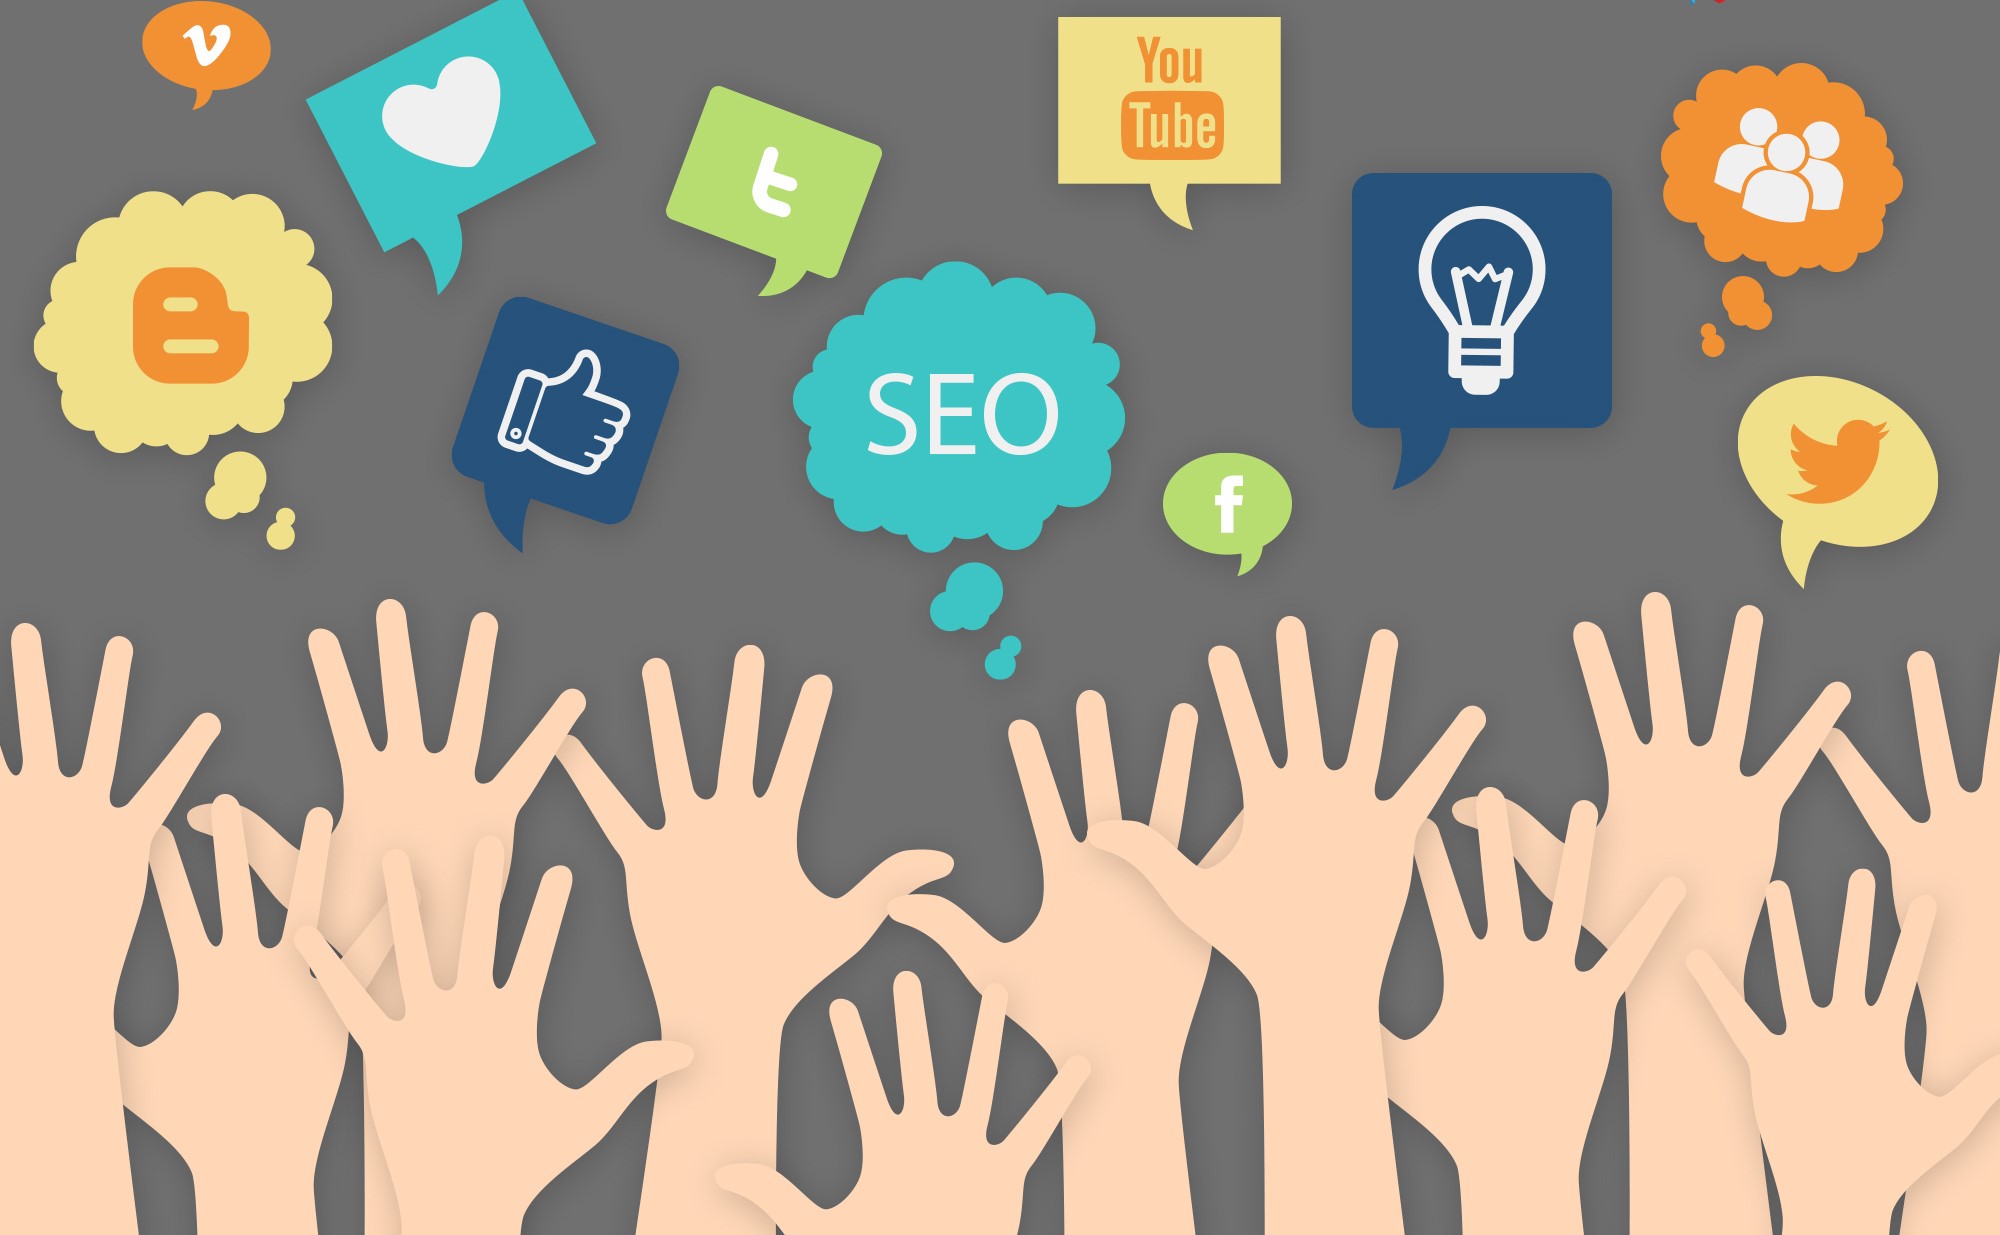 What are social signals and how do they impact SEO?